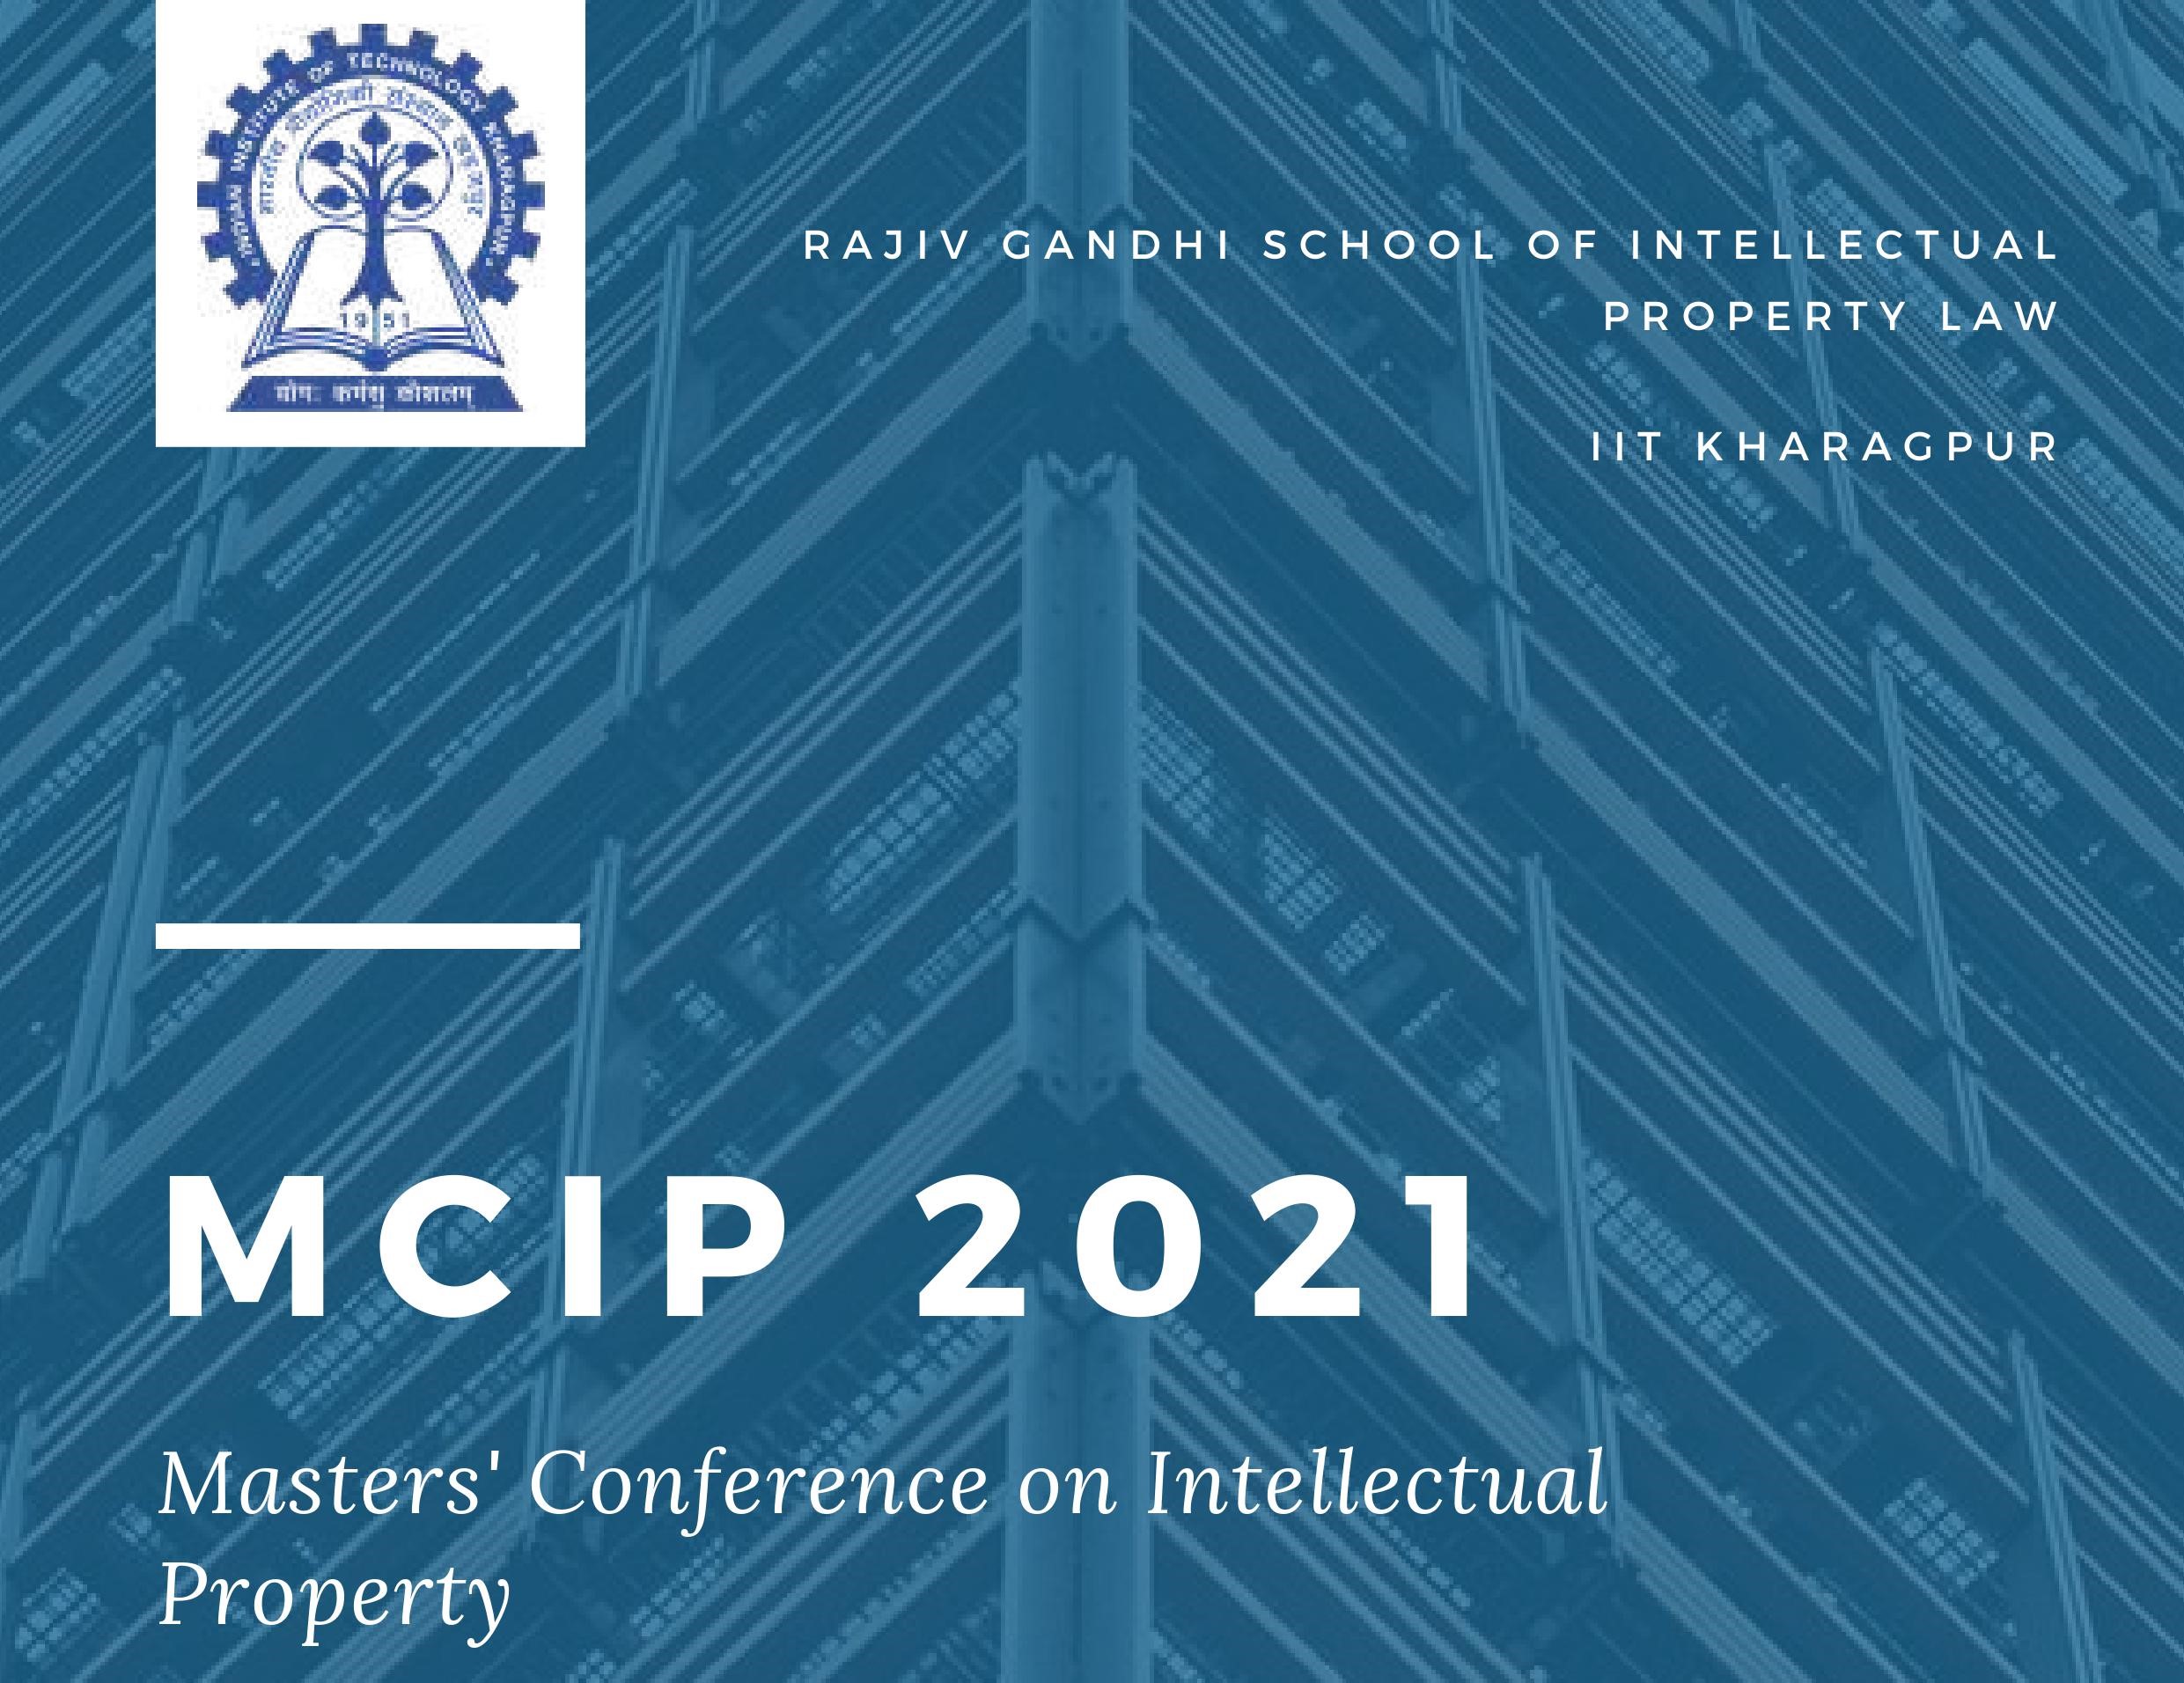 MCIP 2021 Masters Conference on Intellectual Property | RGSOIPL, IIT Kharagpur